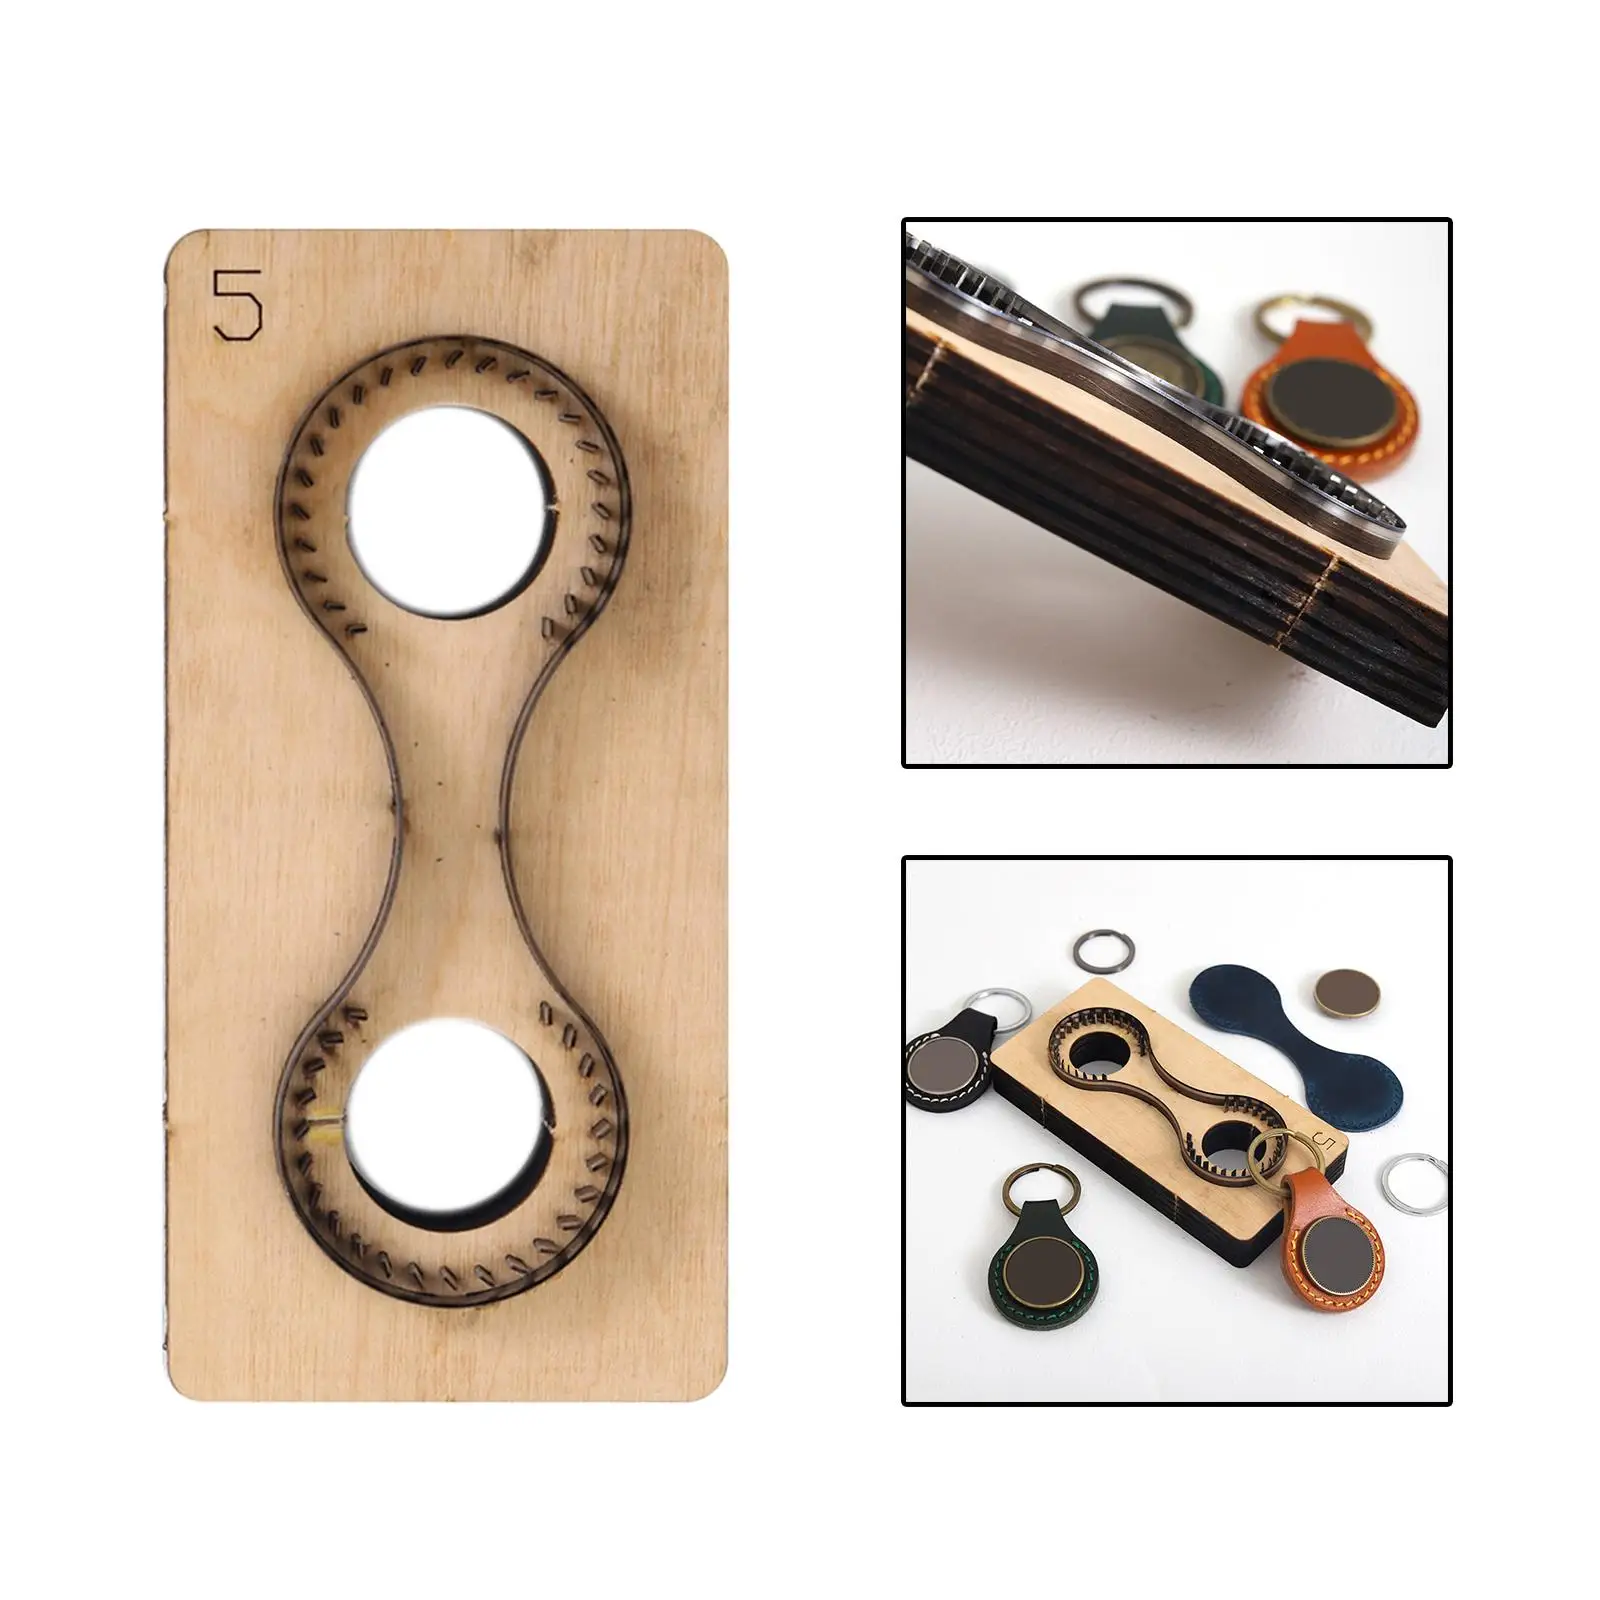 Metal Cutting Dies Key Ring 1 Piece Reusable Tool Kit Hand Punch Blade Craft Wooden Cutter for Leathercraft Die-Cutting Machine